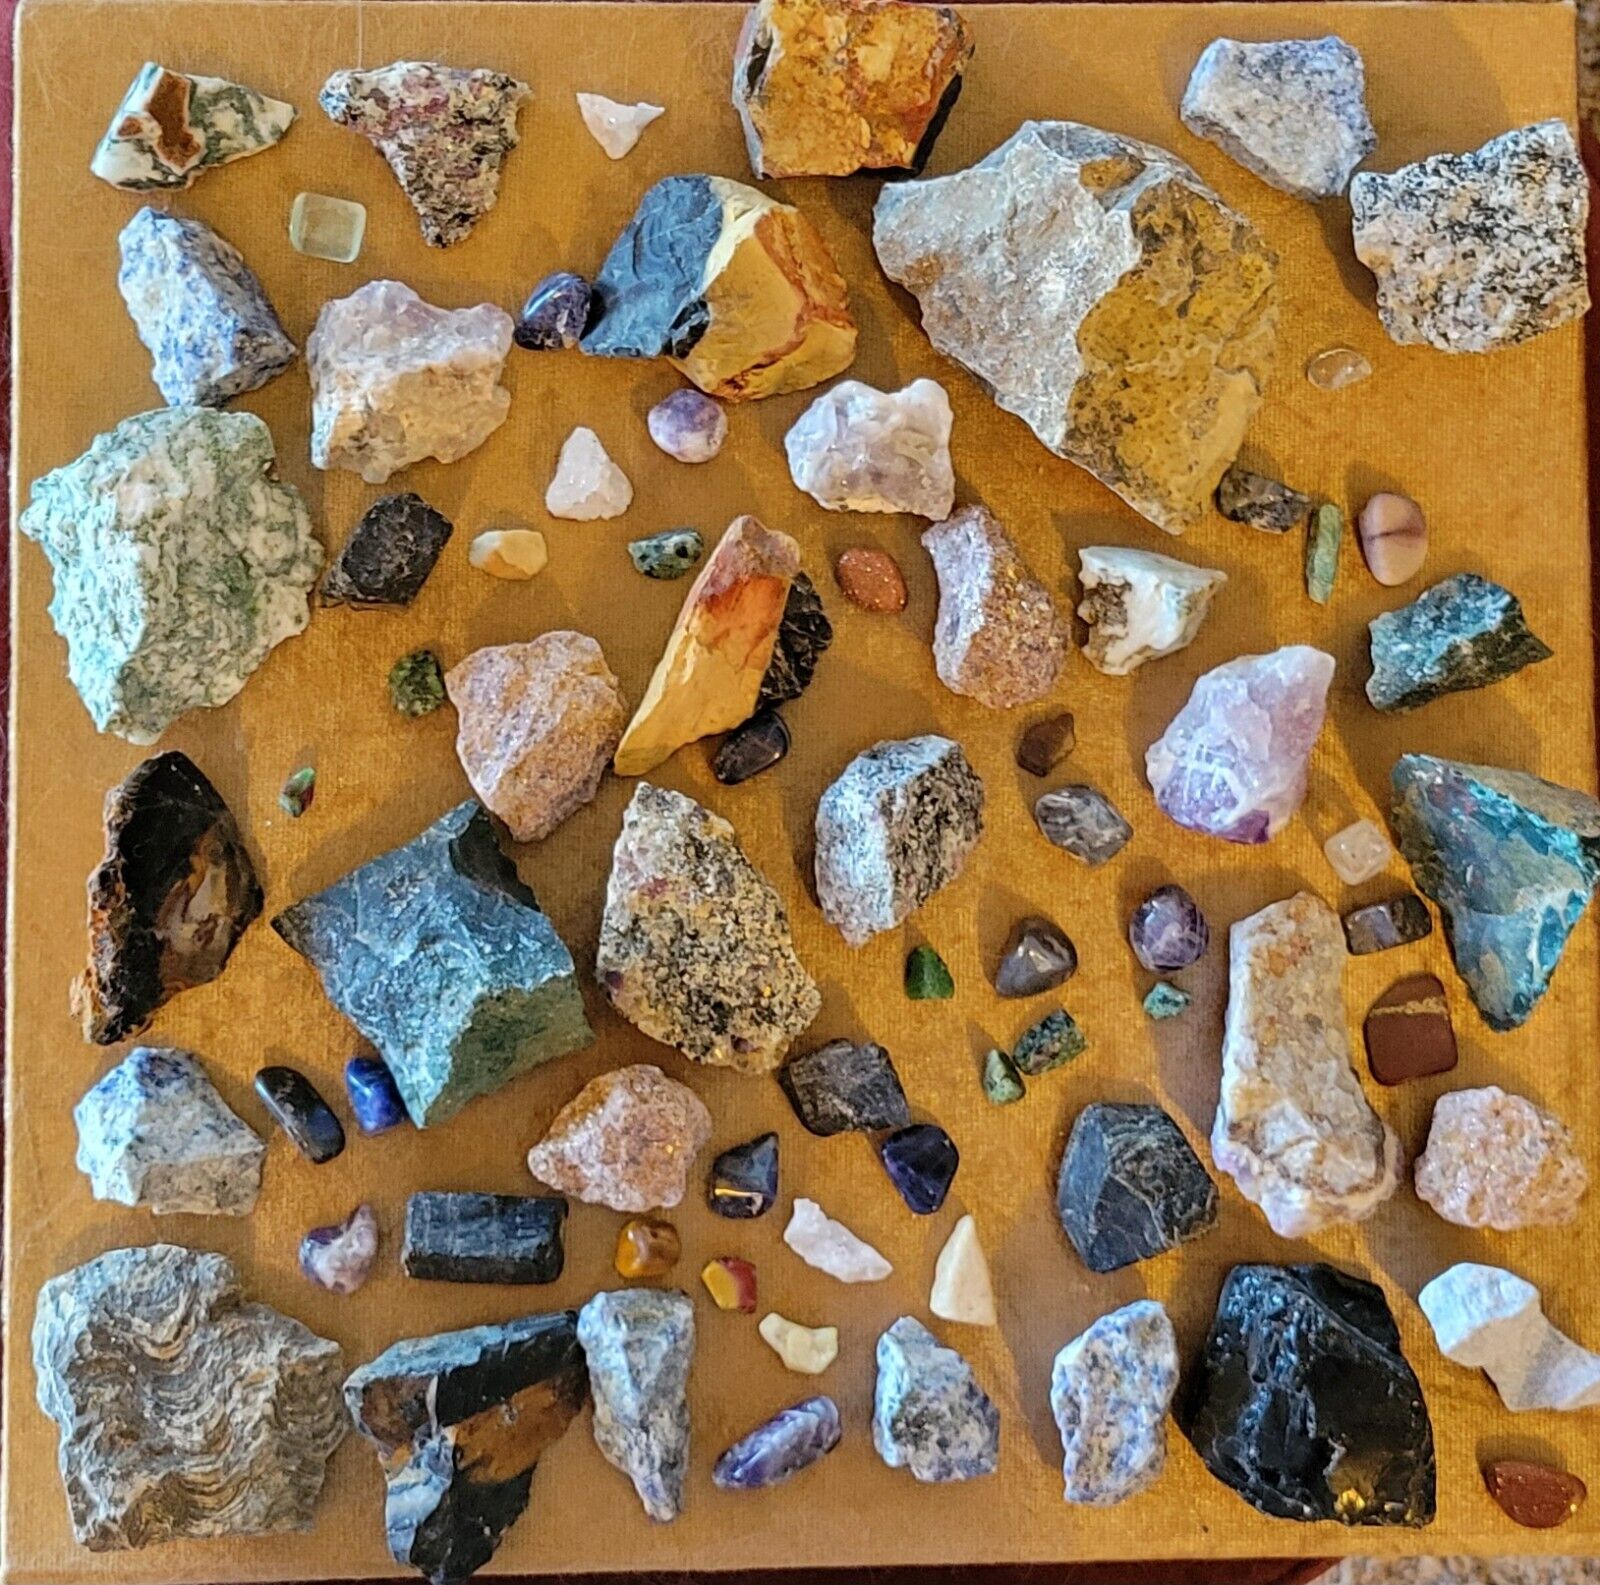 Random assortment of raw crystals and tumbled stones 5lbs, comes in bucket 